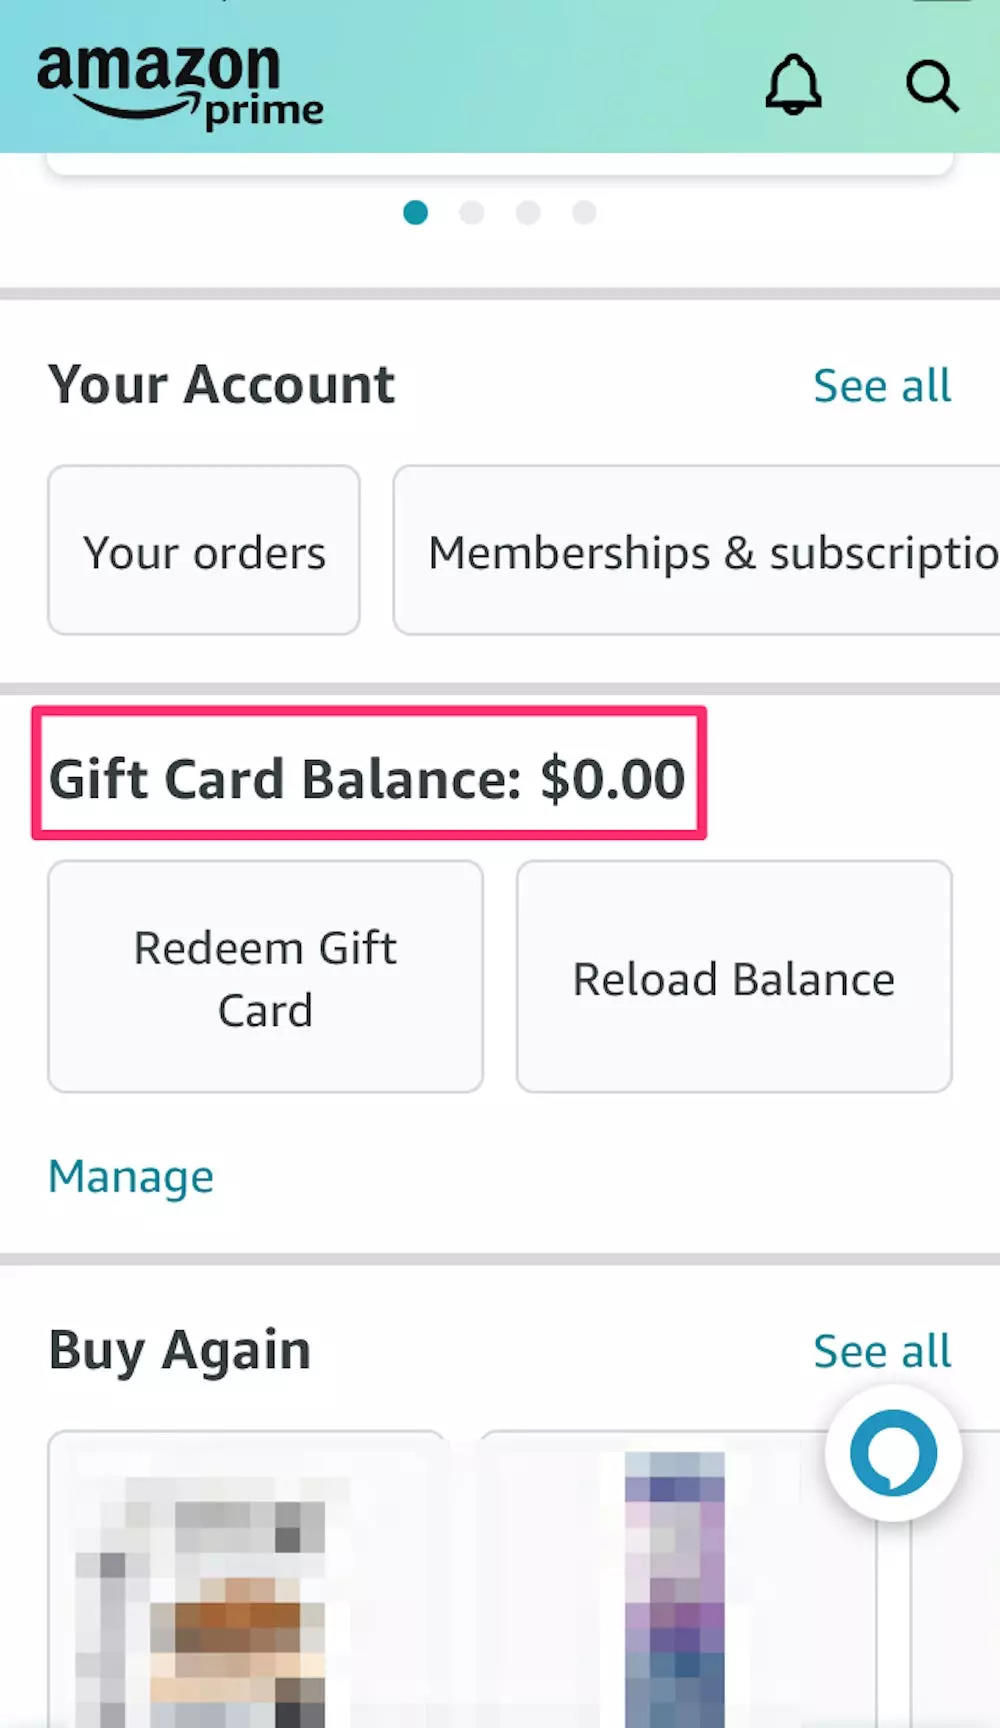 How to Check Your  Gift Card Balance